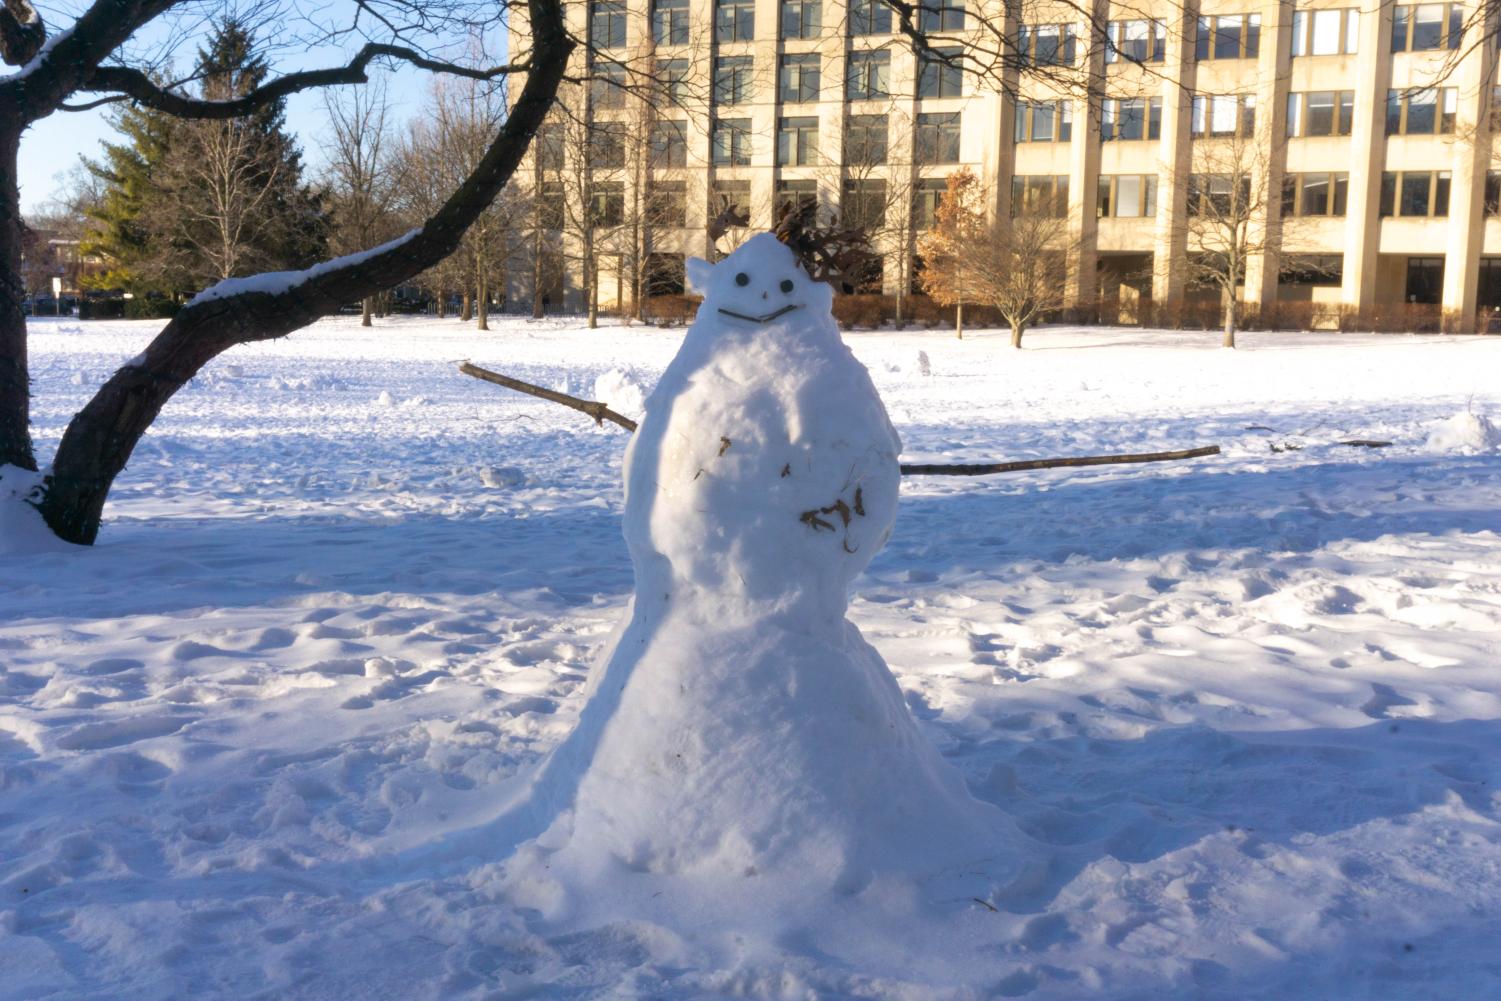 A smiling snowman with leaves on its head in a snowy field.